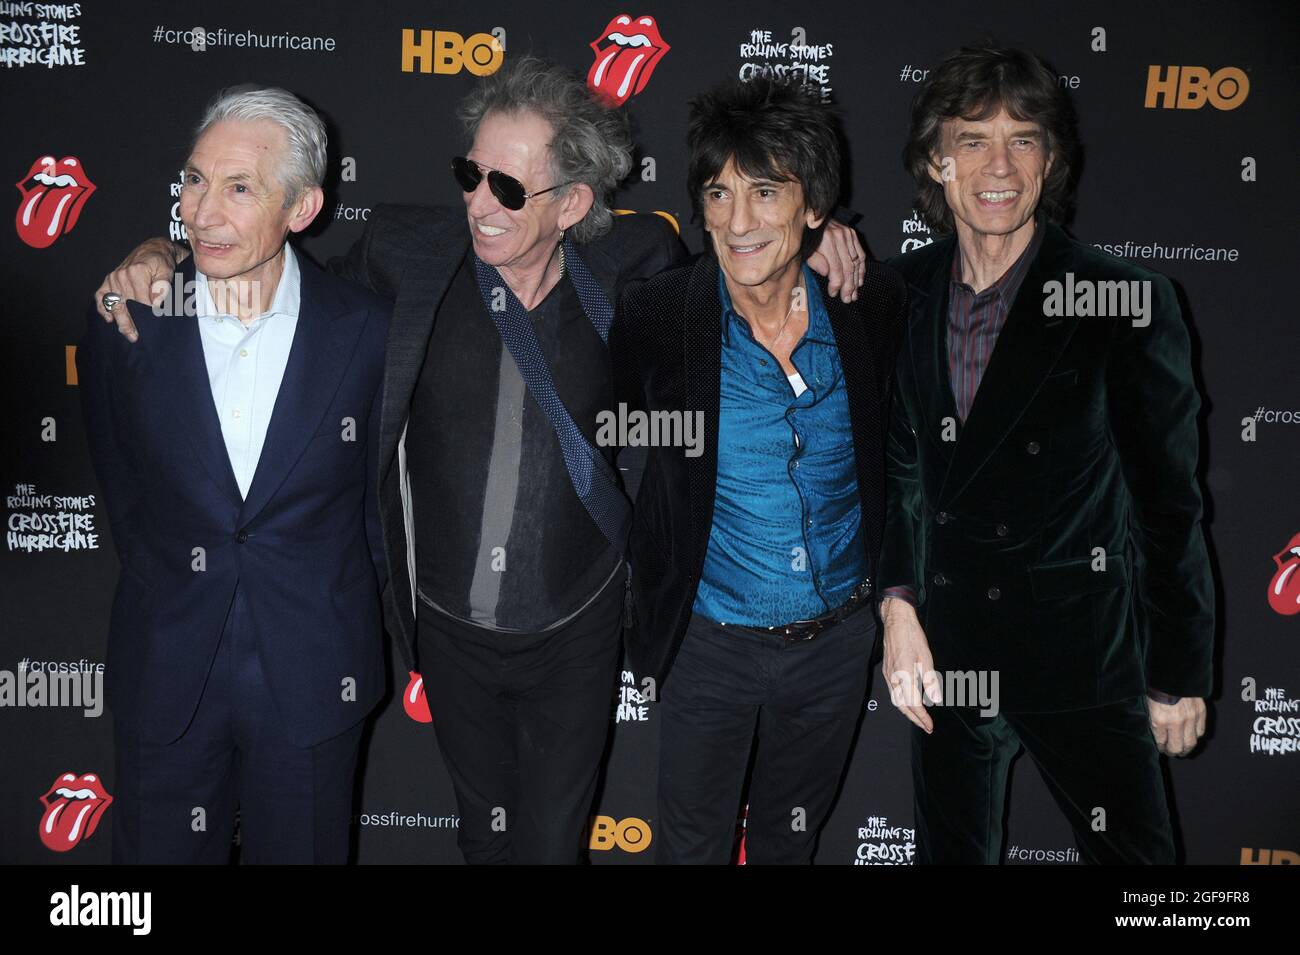 **FILE PHOTO** Charlie Watts Has Passed Away . NEW YORK, NY - NOVEMBER 13: Charlie Watts, Keith Richards, Ronnie Wood and Mick Jagger of The Rolling Stones at 'The Rolling Stones Crossfire Hurricane' Premiere at Ziegfeld Theater on November 13, 2012 in New York City. Credit mpi01/MediaPunch Inc. Stock Photo